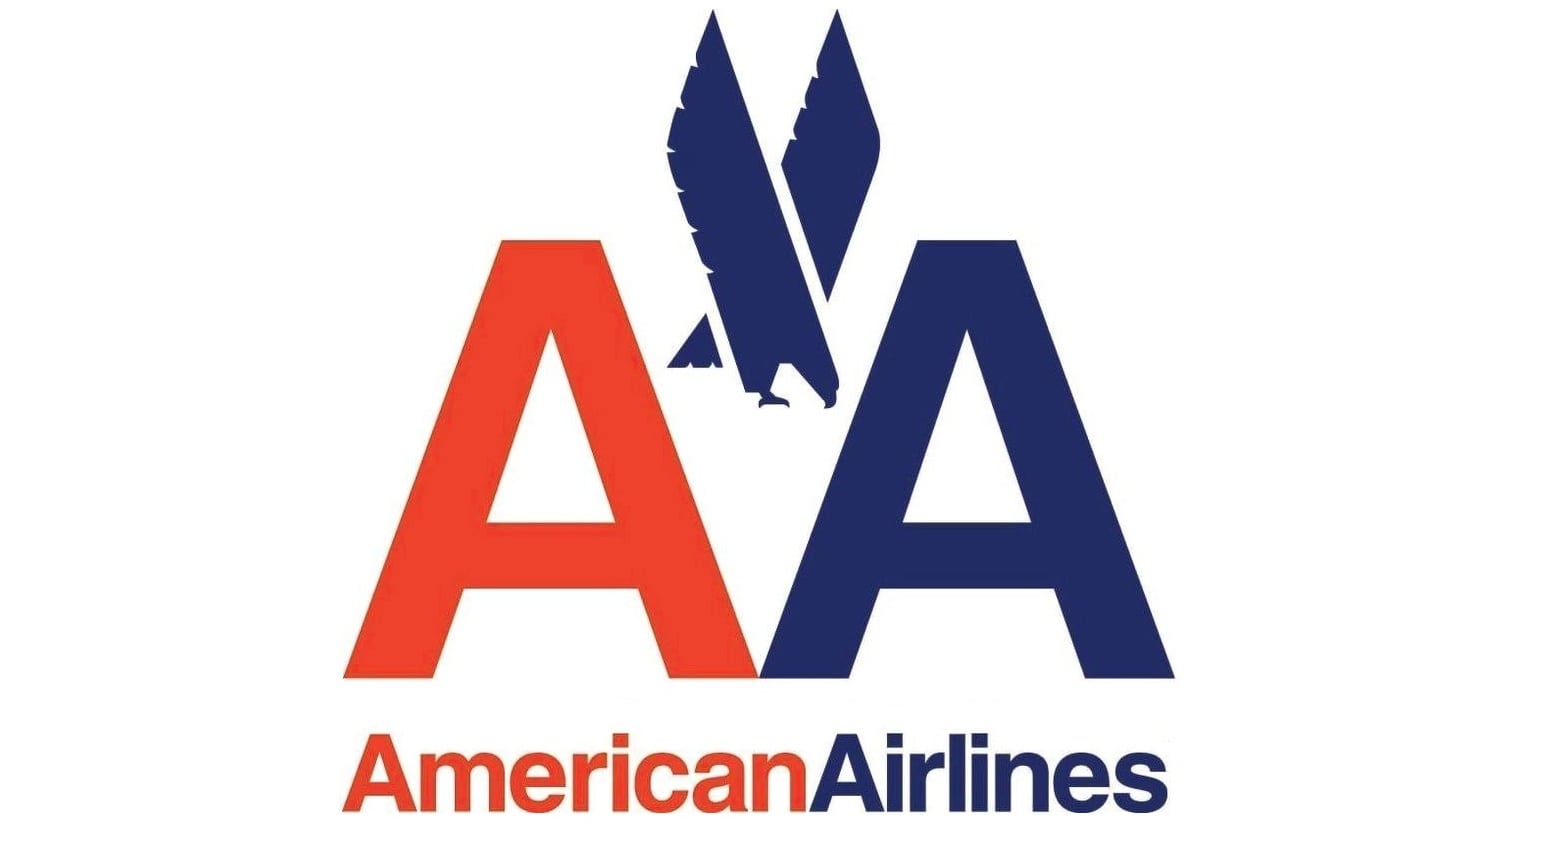 Massimo Vignelli's iconic logo for American Airlines. 